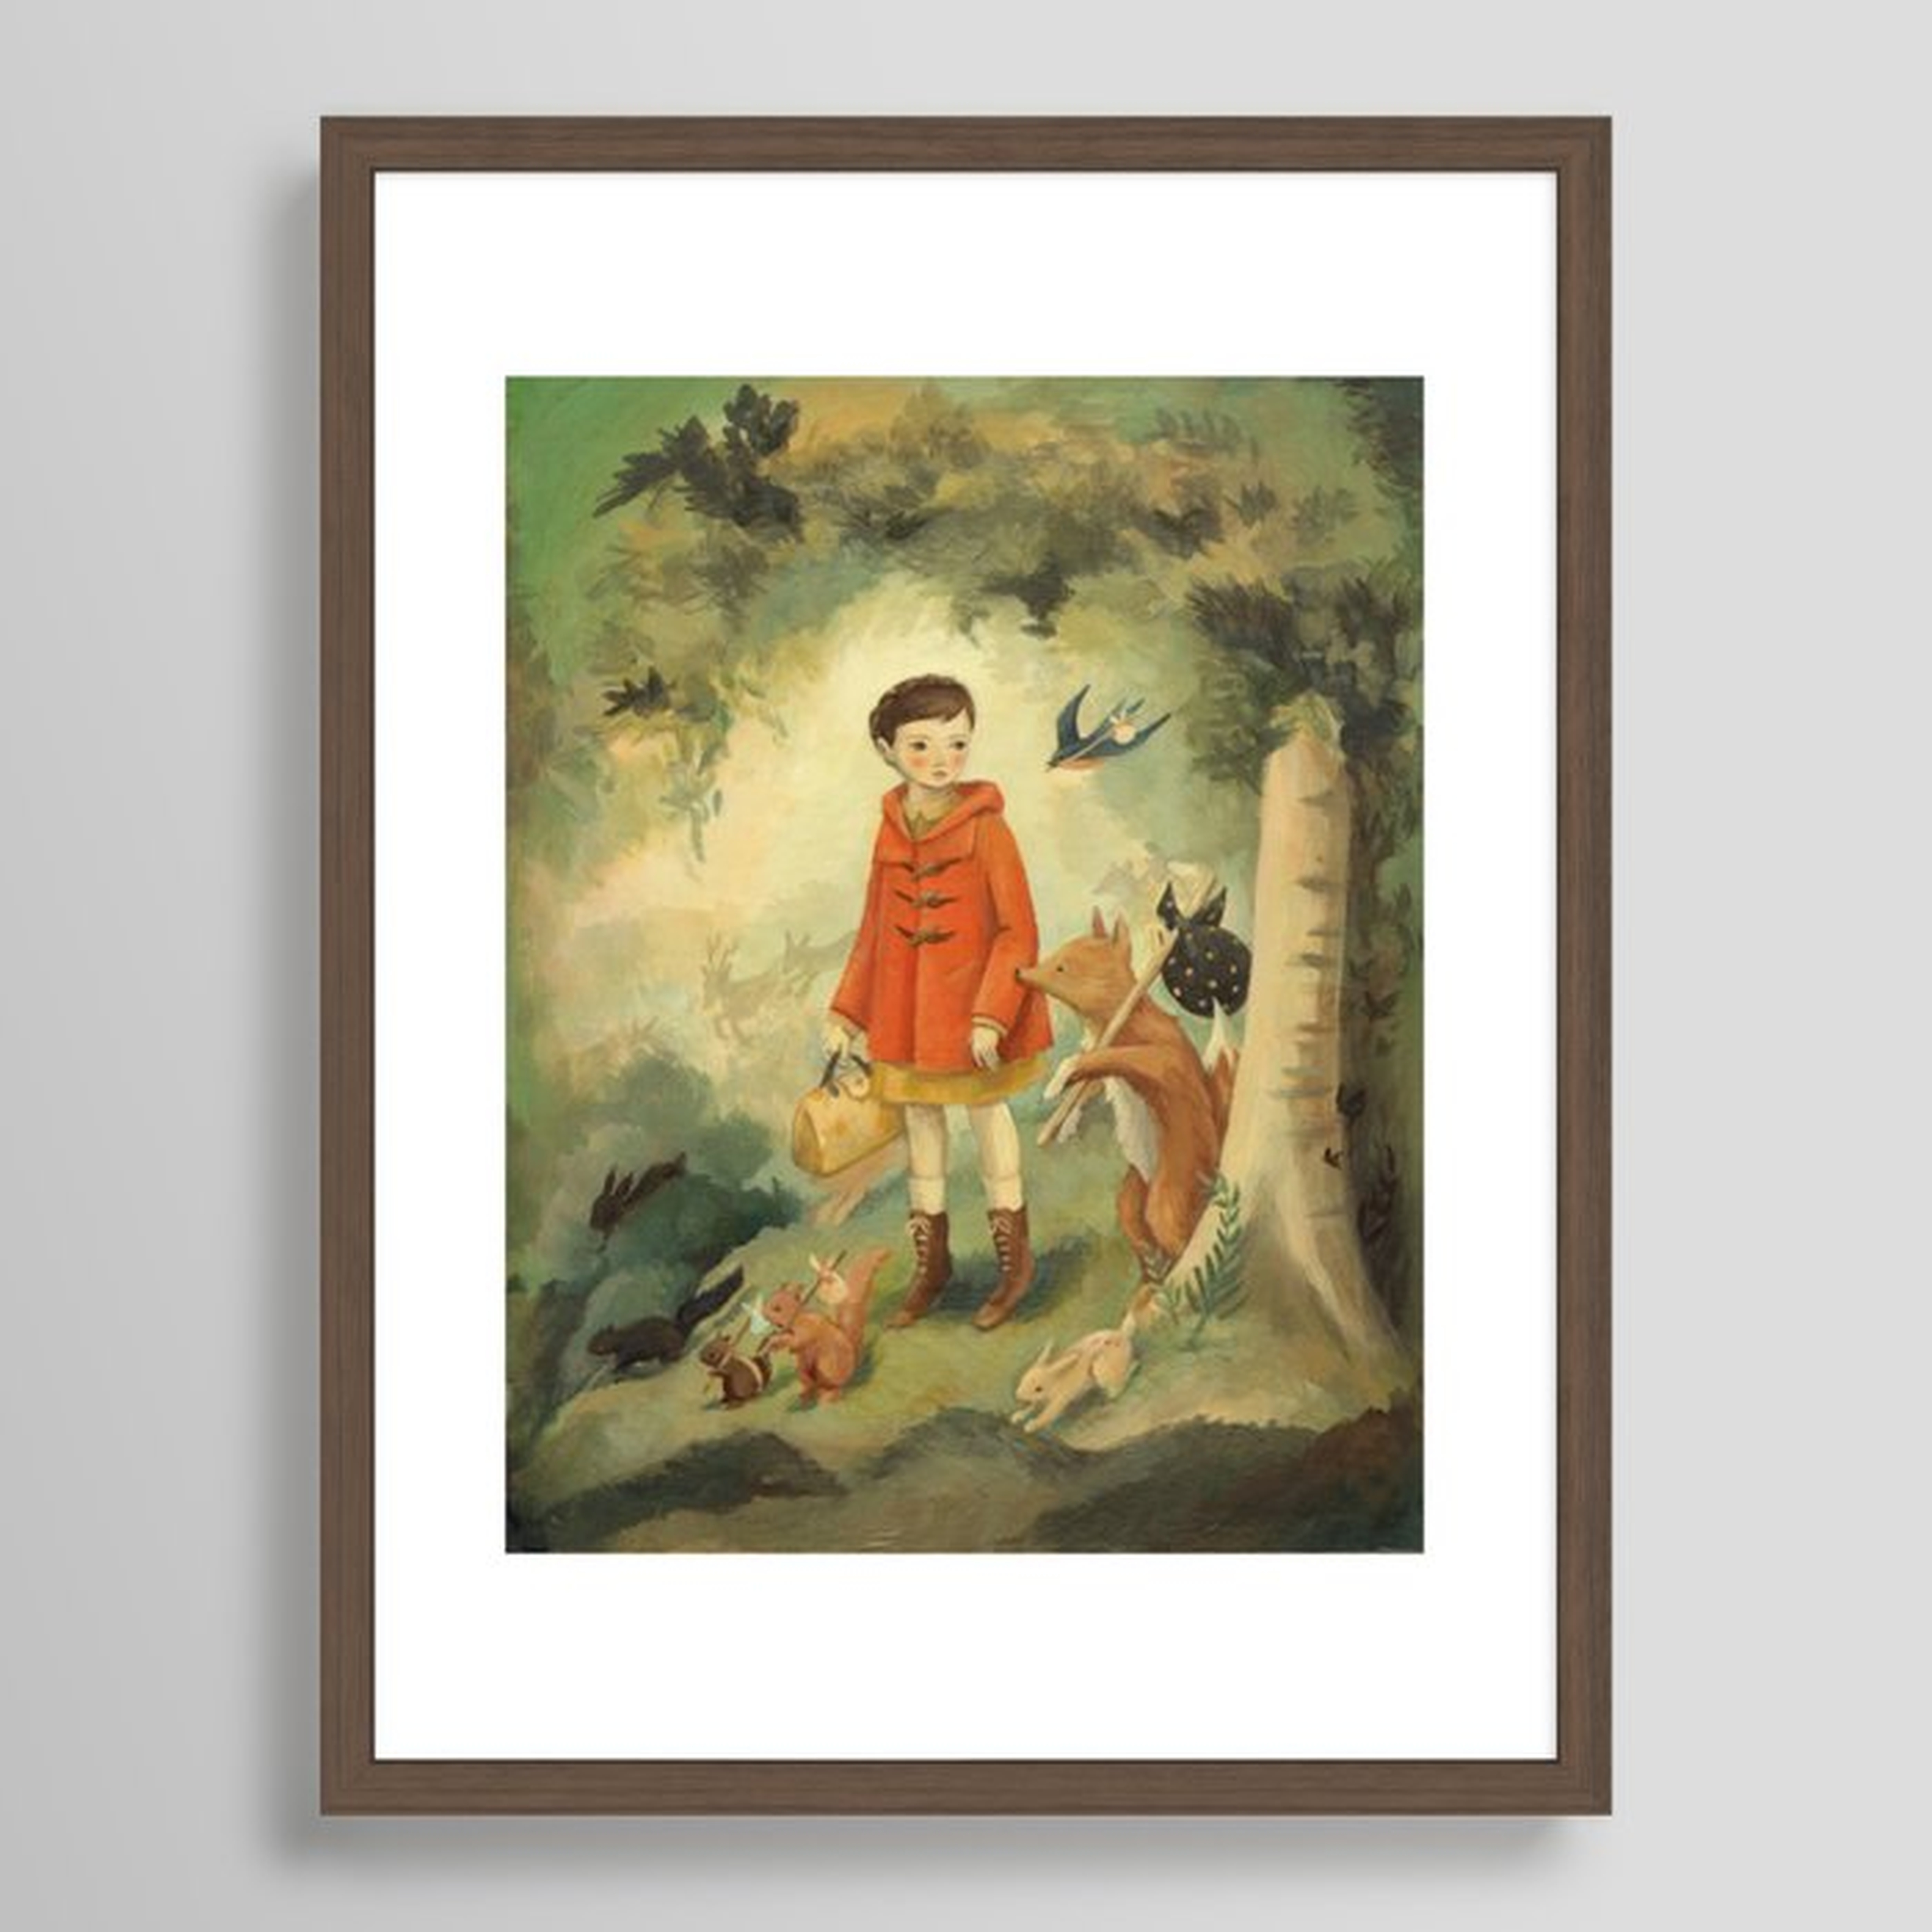 Out of the Woods Framed Art Print - Society6